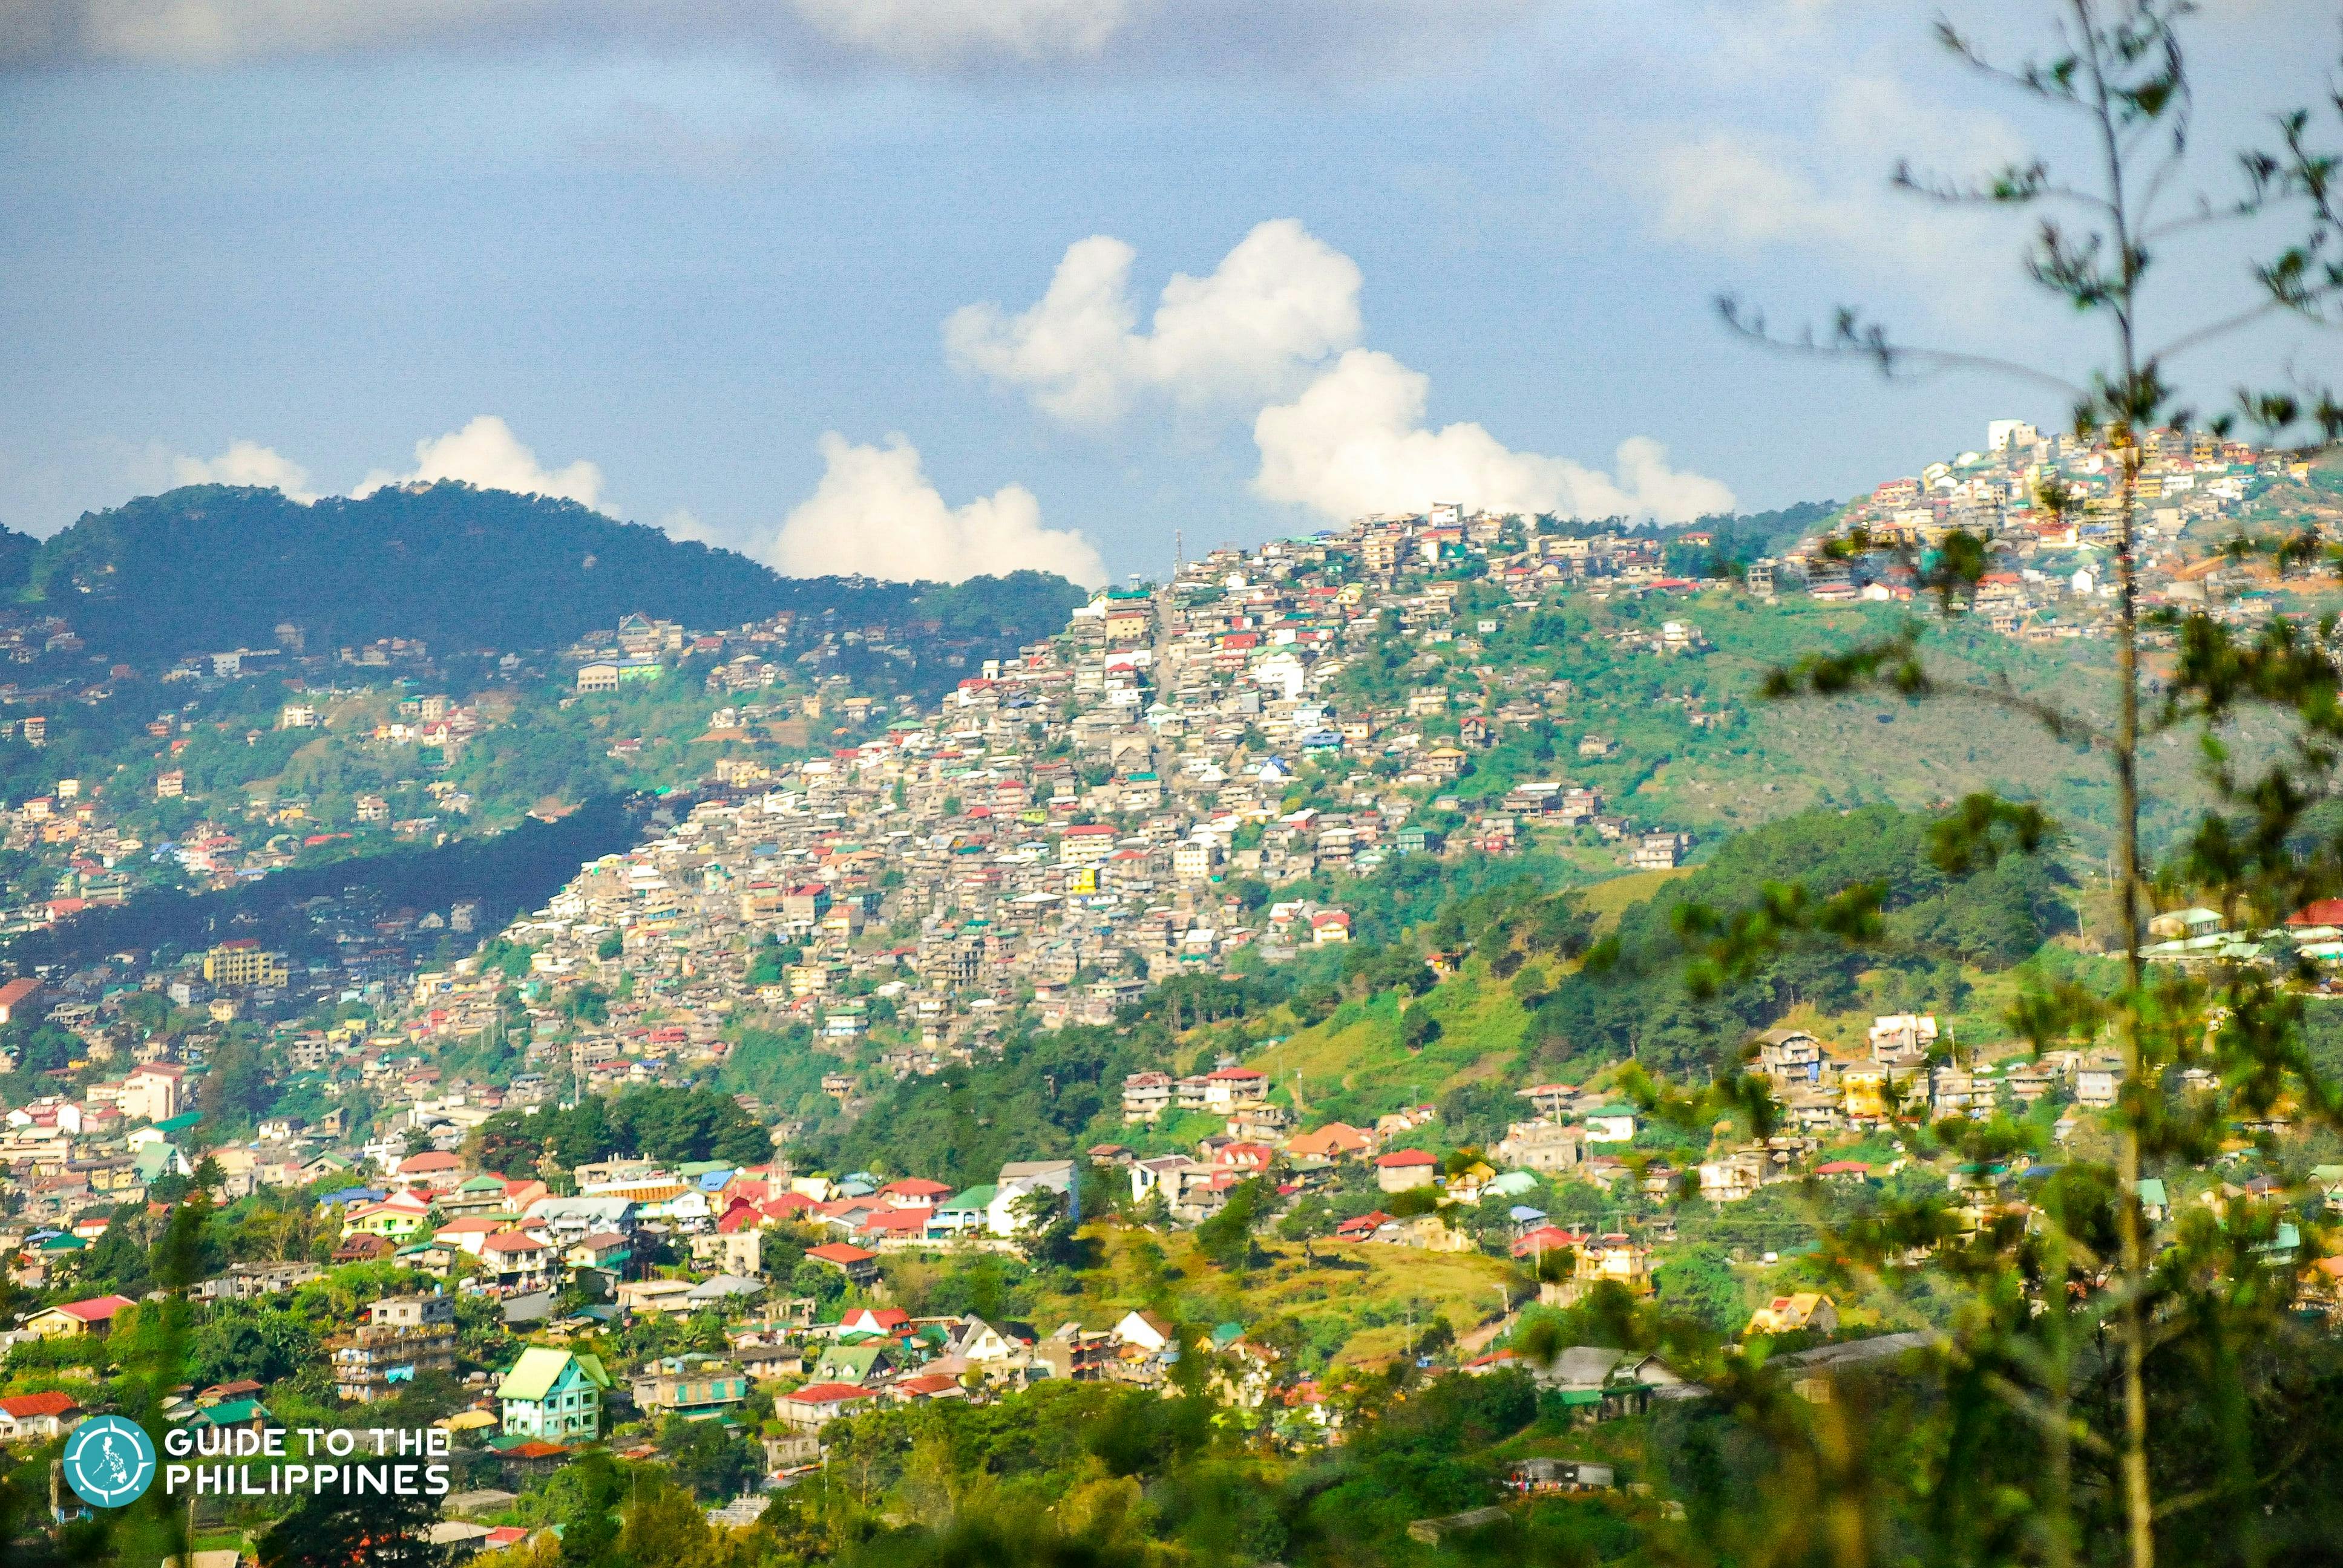 Scenic view from Mines View Park in Baguio City